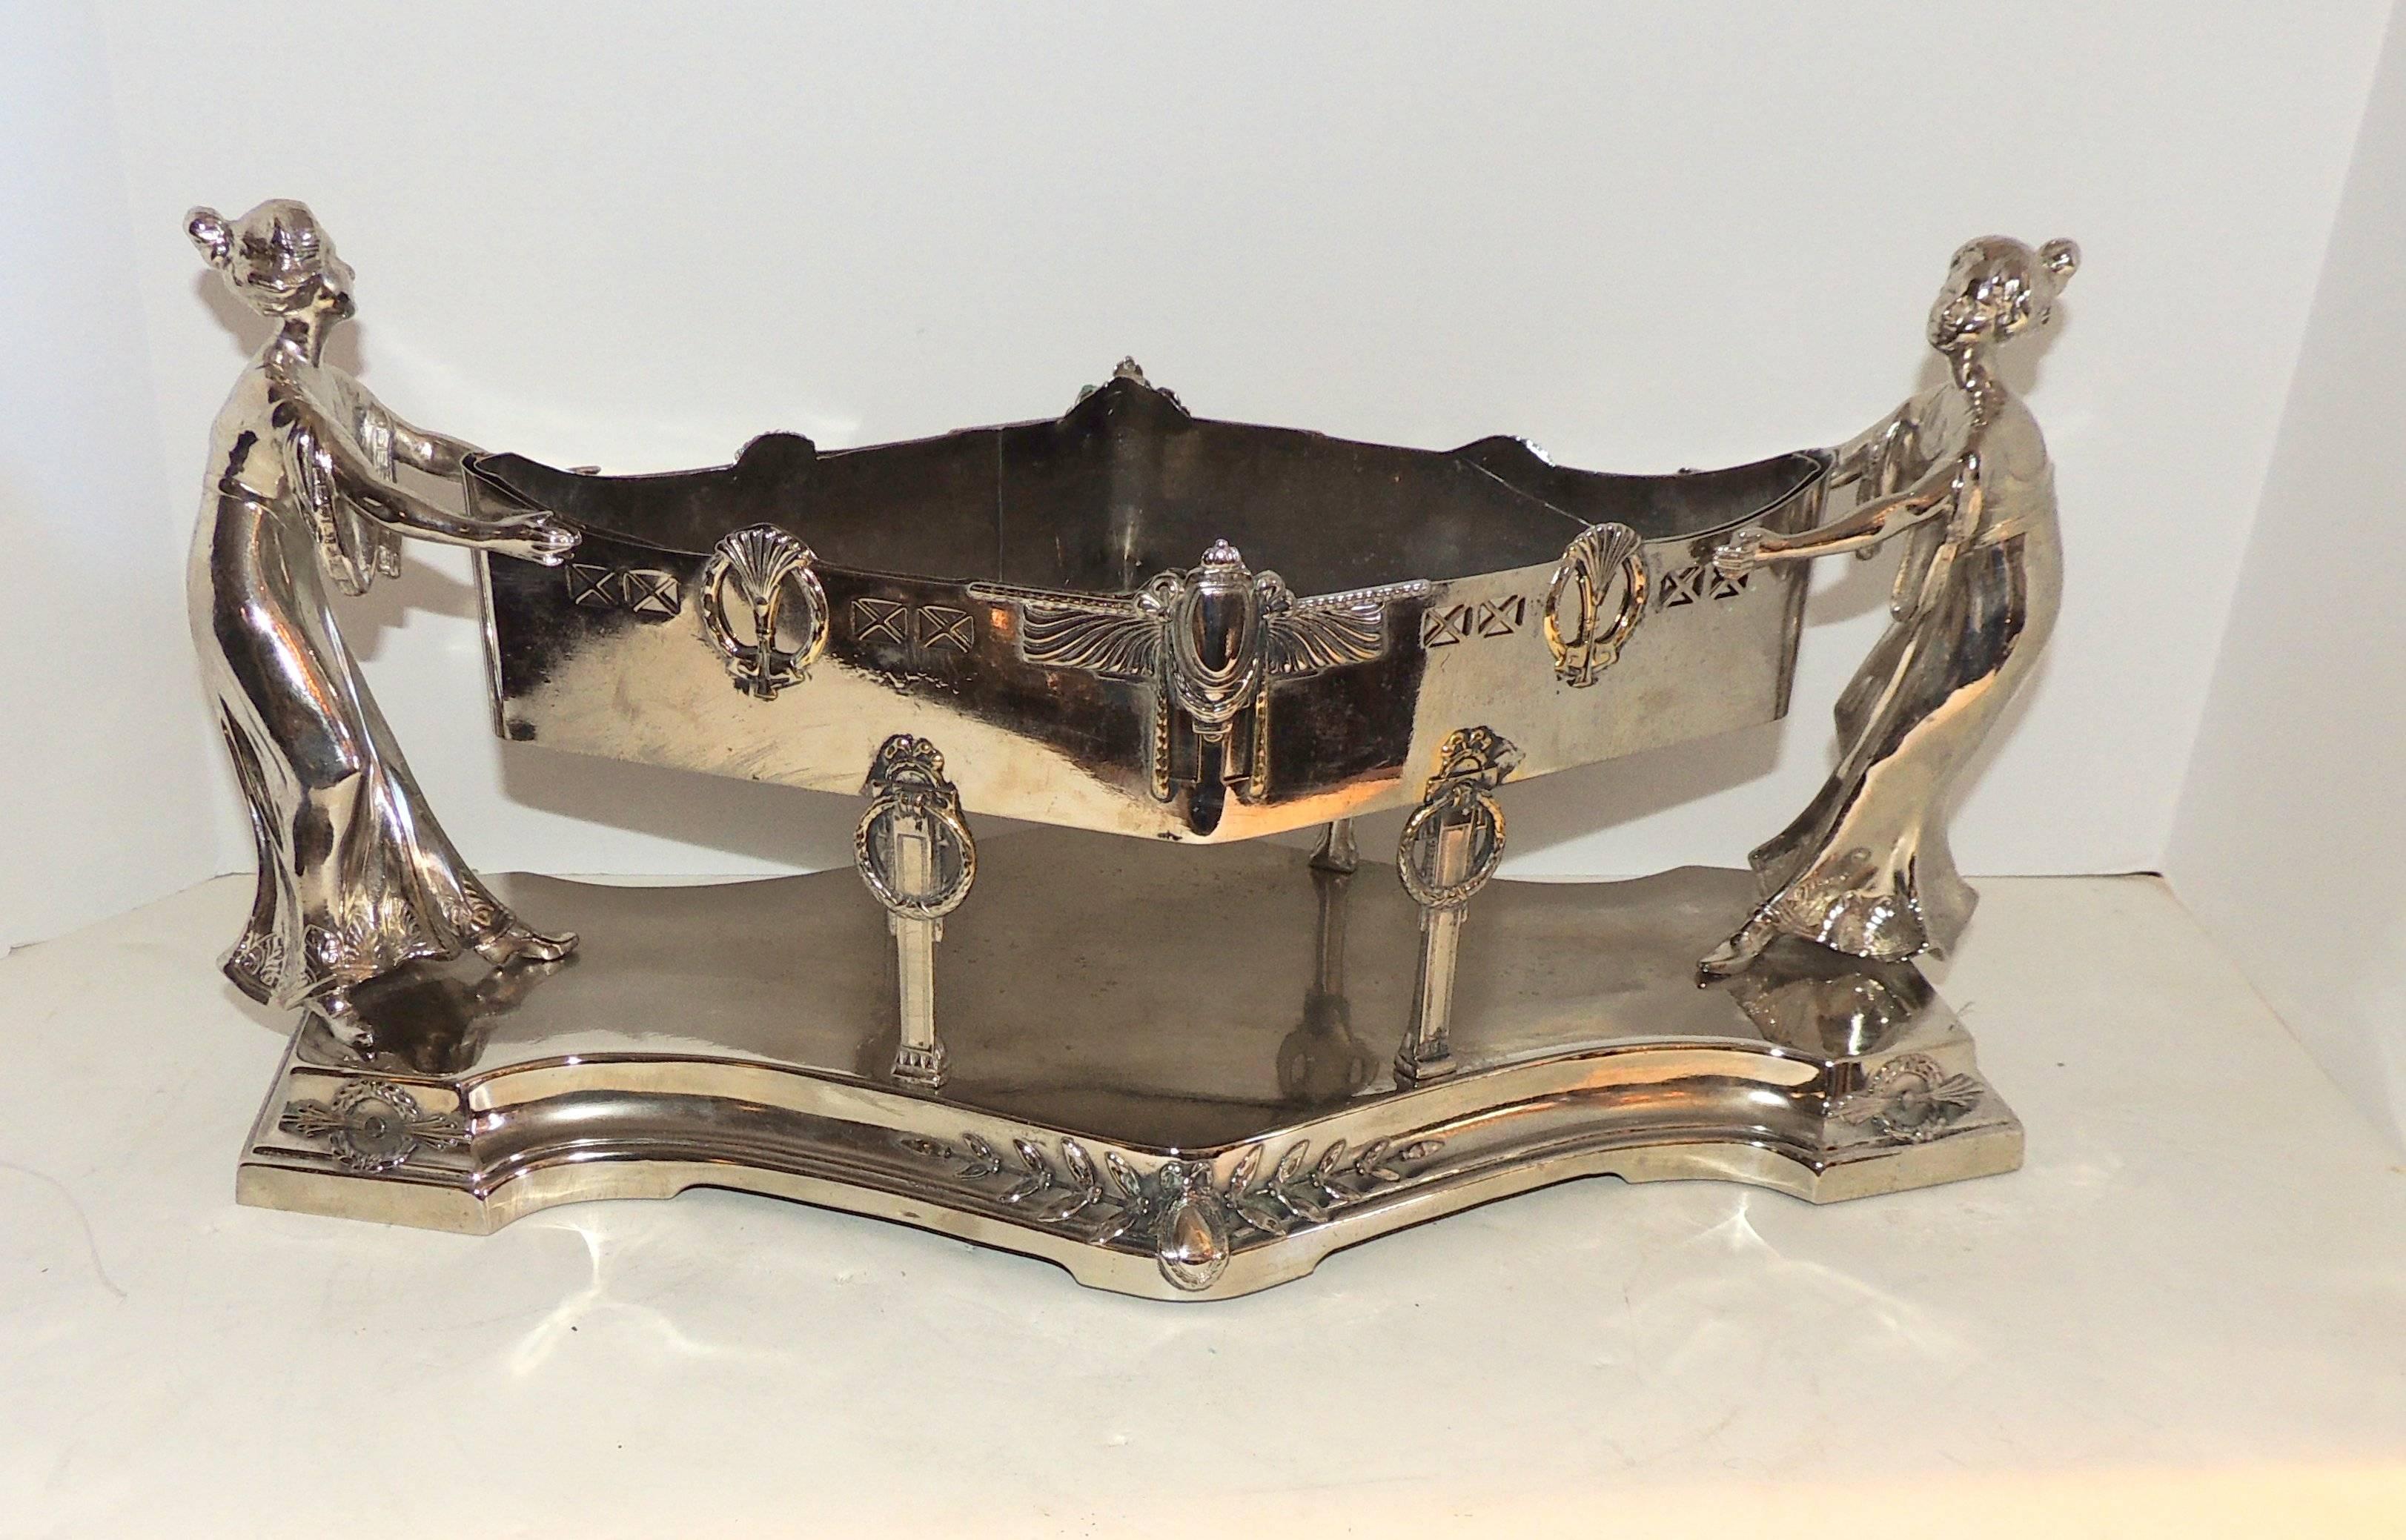 A wonderful silver plated Art Deco centerpiece with two female figures supporting the diamond shape centerpiece with removable insert. Decorated with draping, wreaths and filigree detail.

Measures: 18